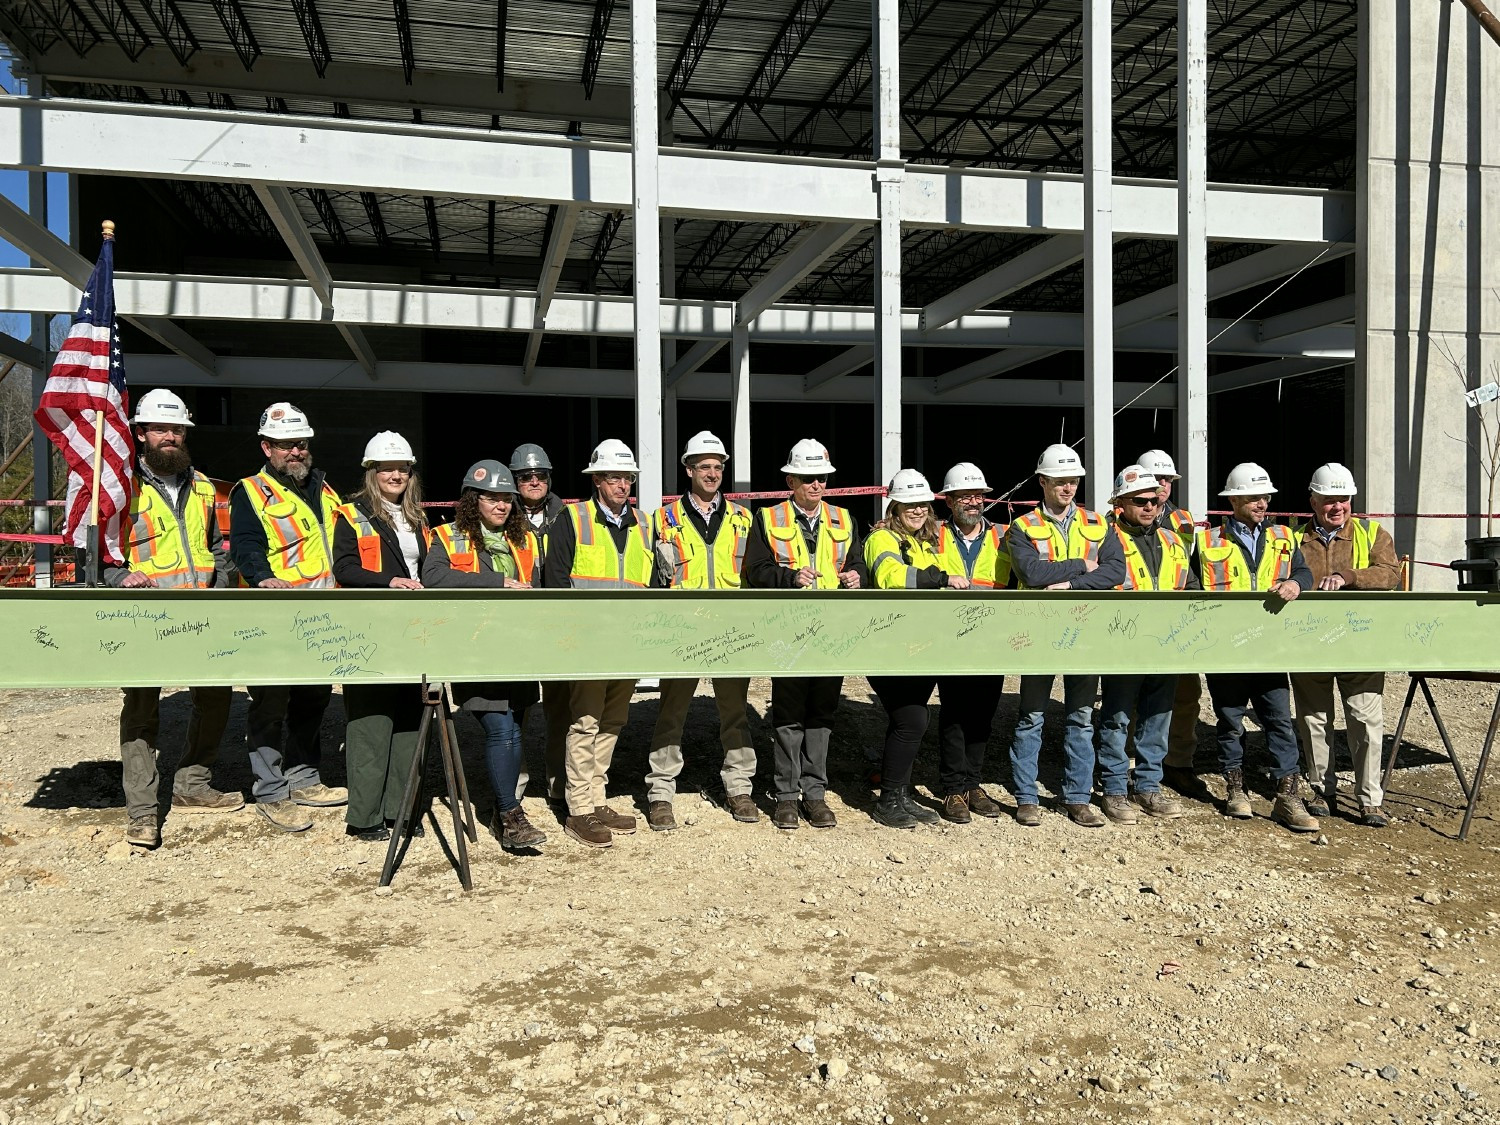 Our team celebrates the completion of the structure with a topping out ceremony by lifting the final beam into place.